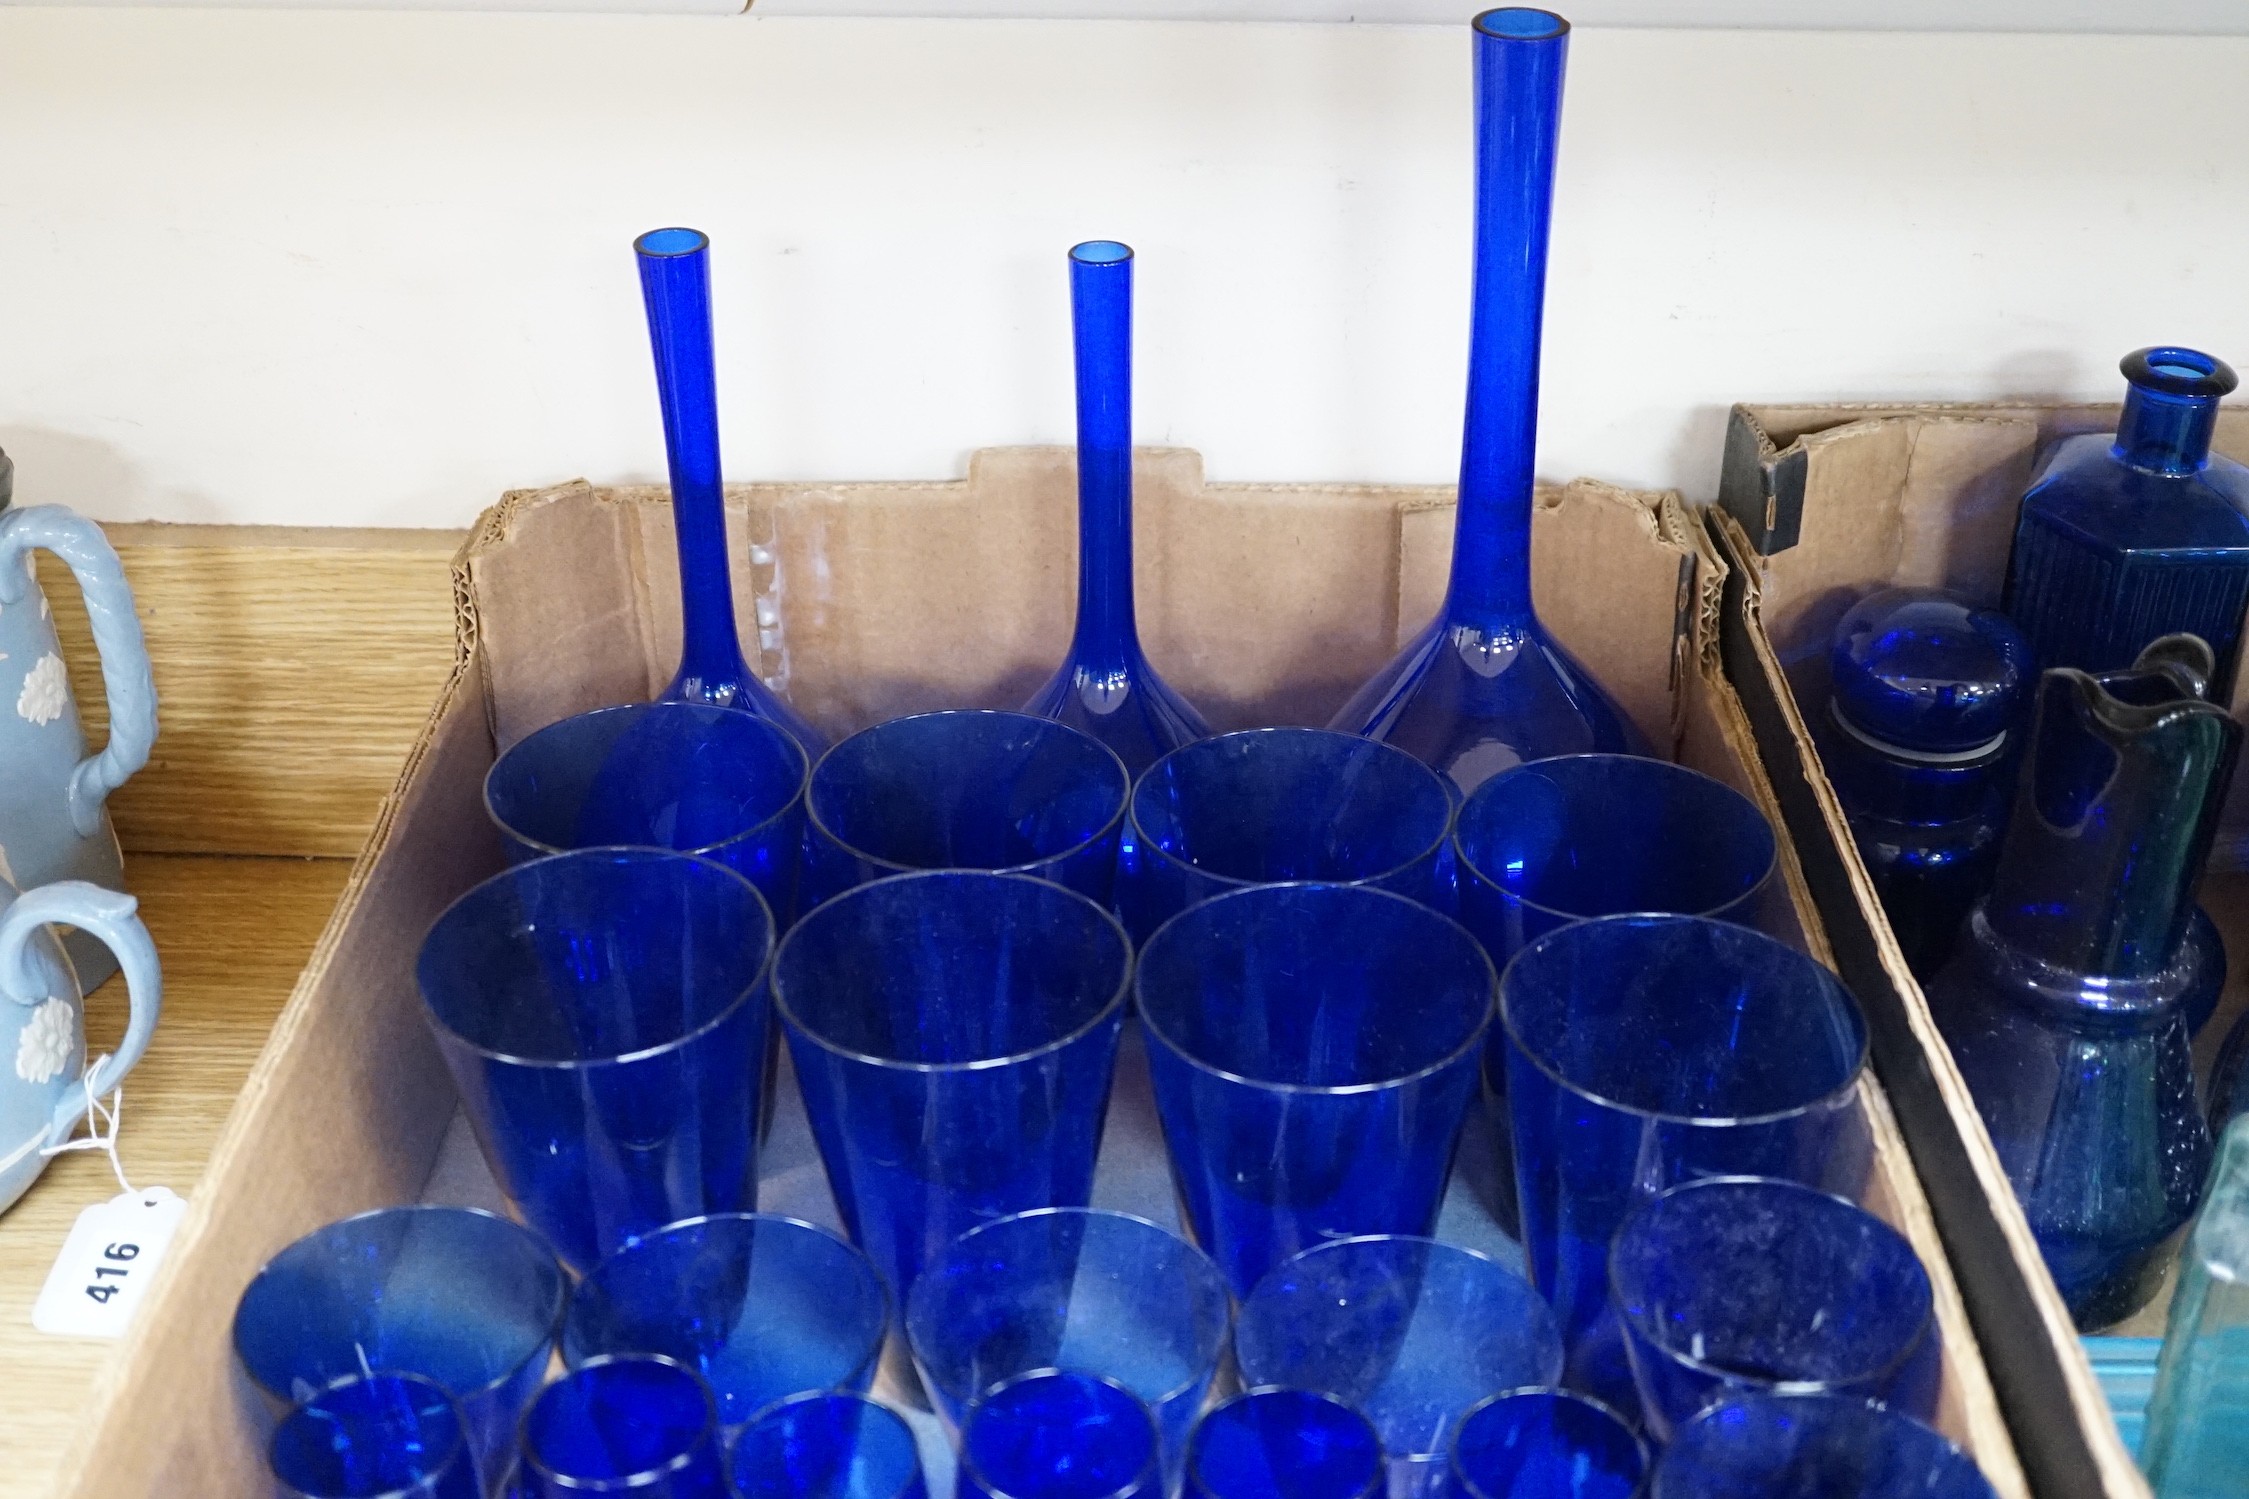 A collection of dark blue, green and turquoise coloured glassware, including three long stemmed glasses